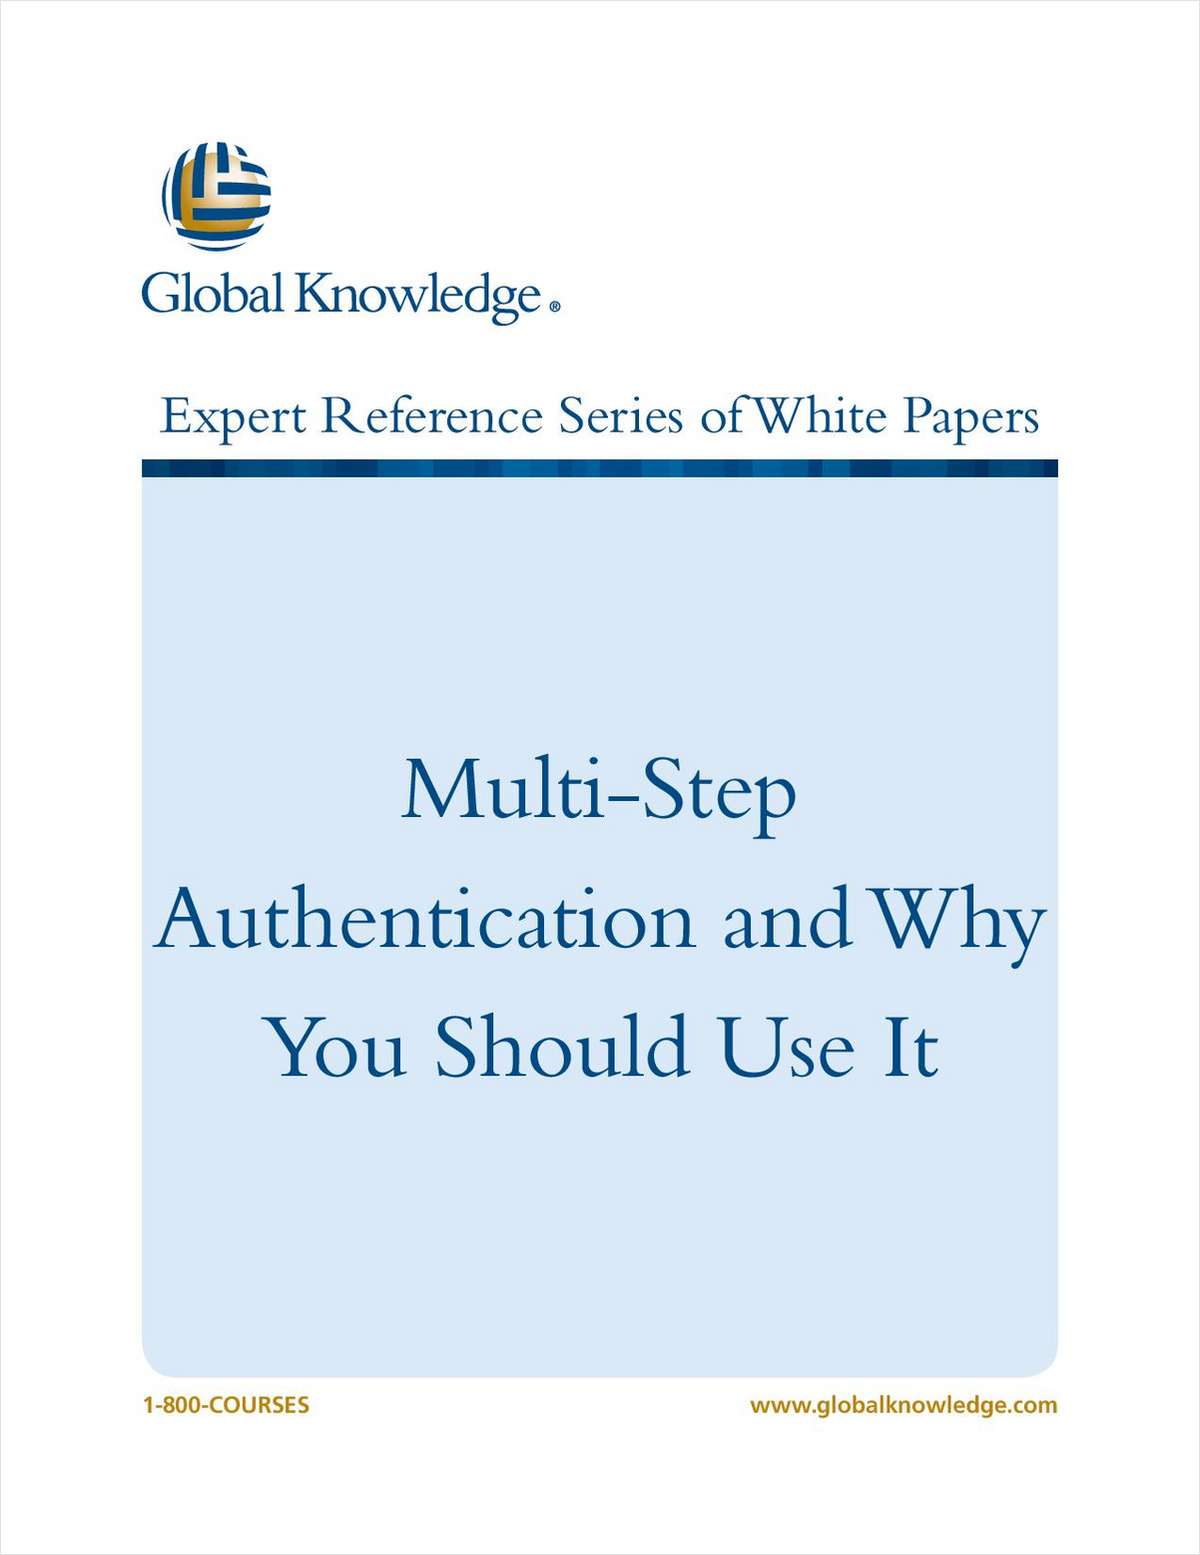 Multi-Step Authentication and Why You Should Use It